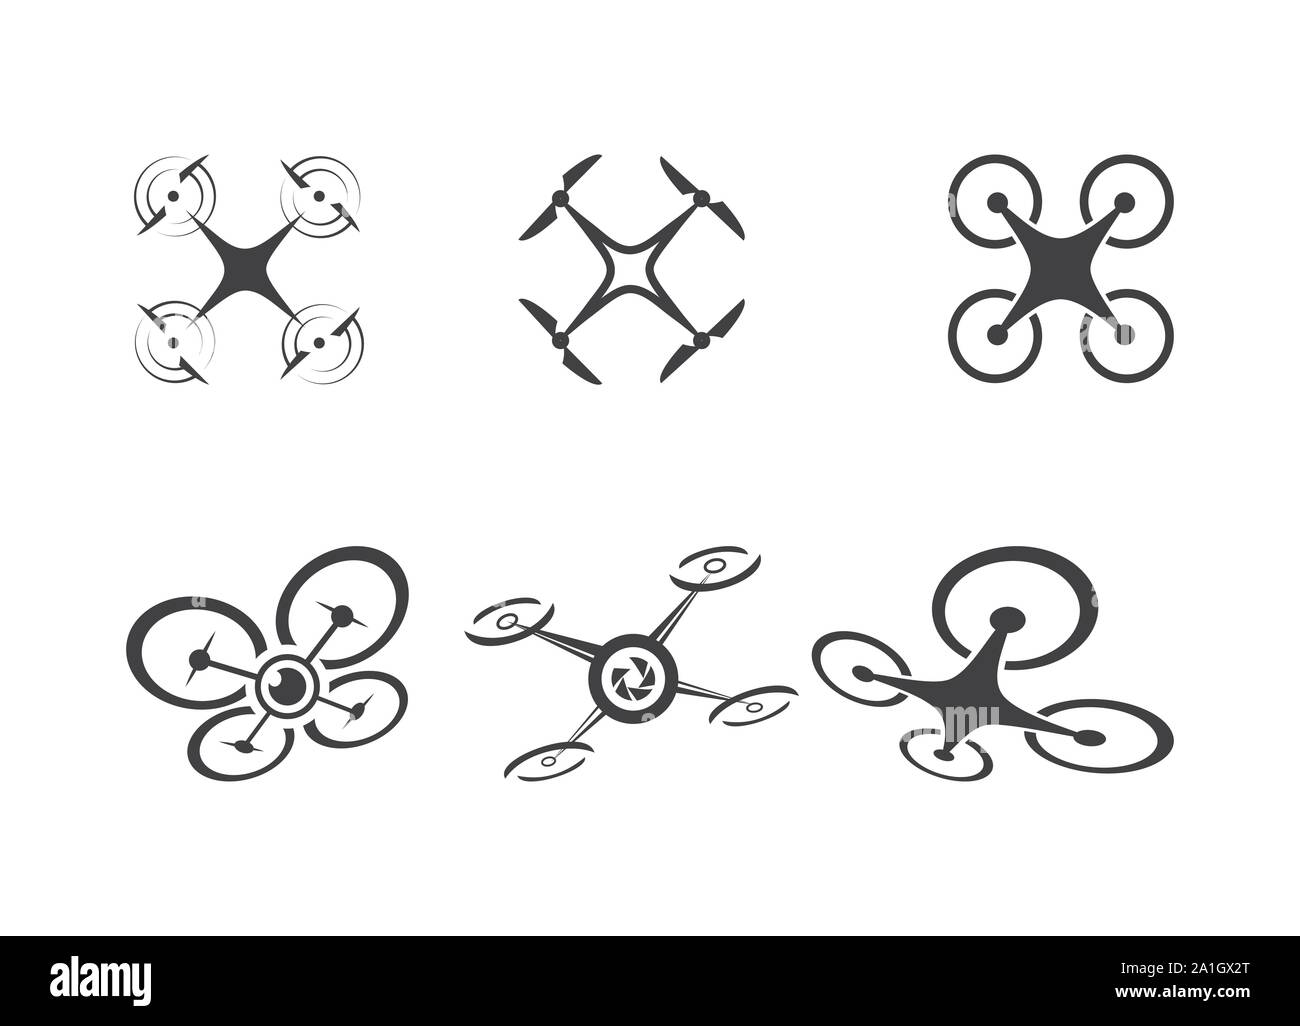 Template Drone Logo, drone logo, Drone icons set. Logos templates of flying drones, Drone Photo Logo Design Template, drone logo vector simple design, Stock Vector